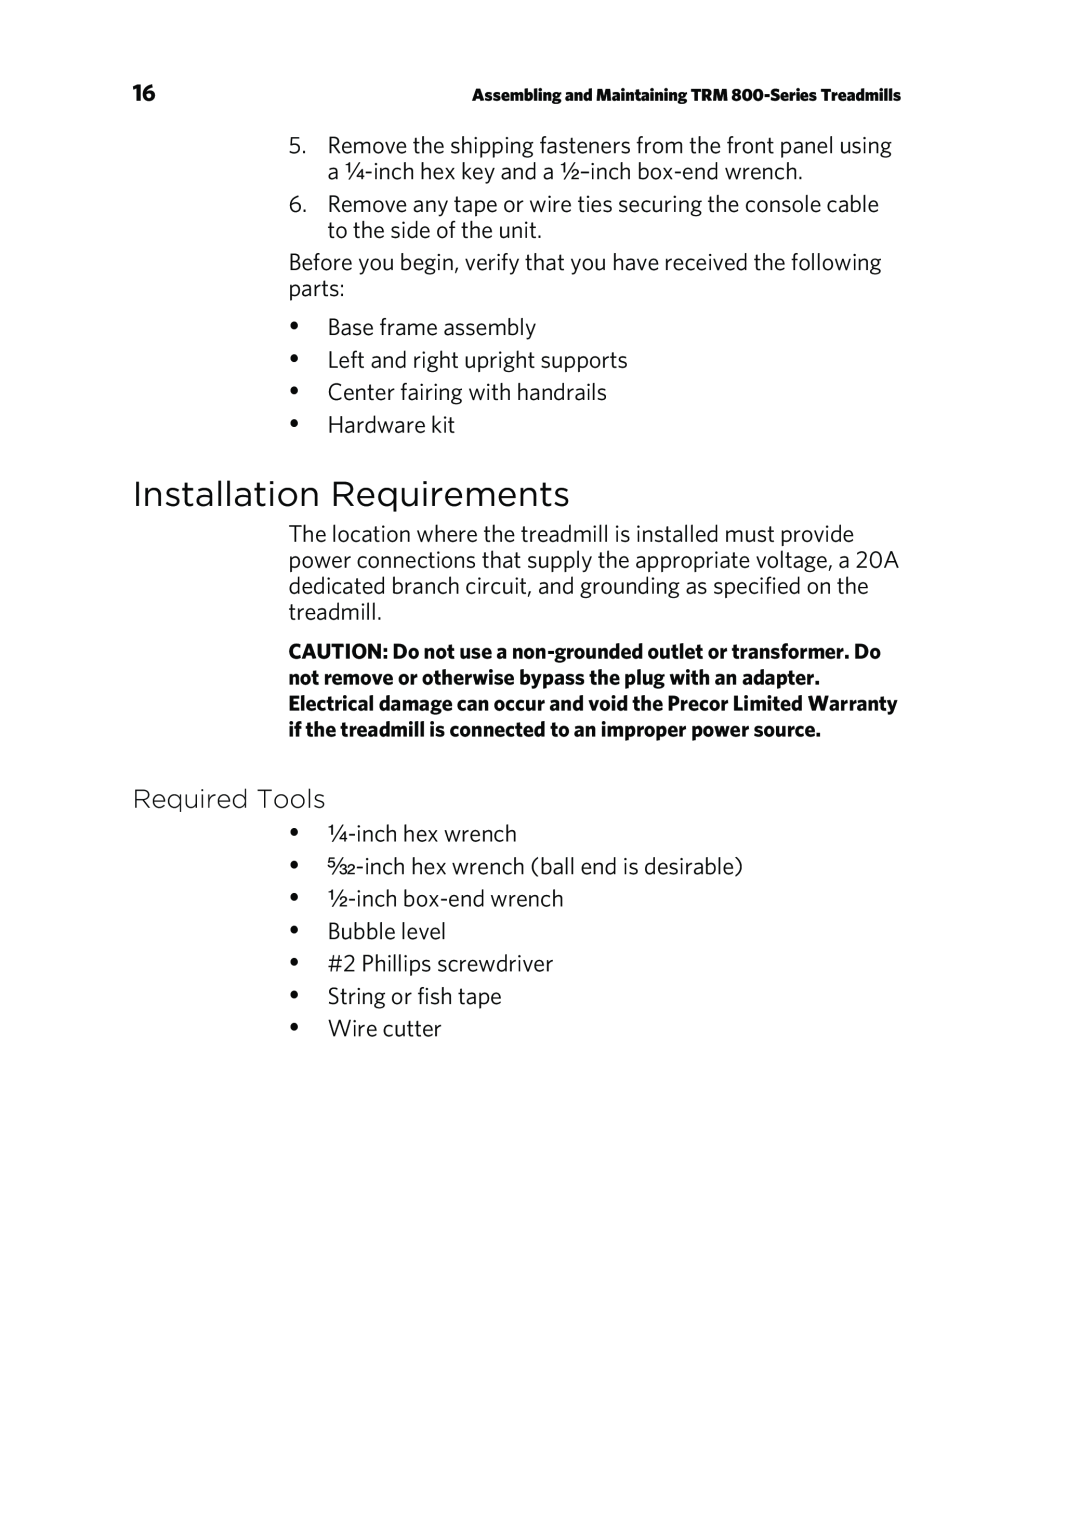 Precor P80 manual Installation Requirements, Required Tools 